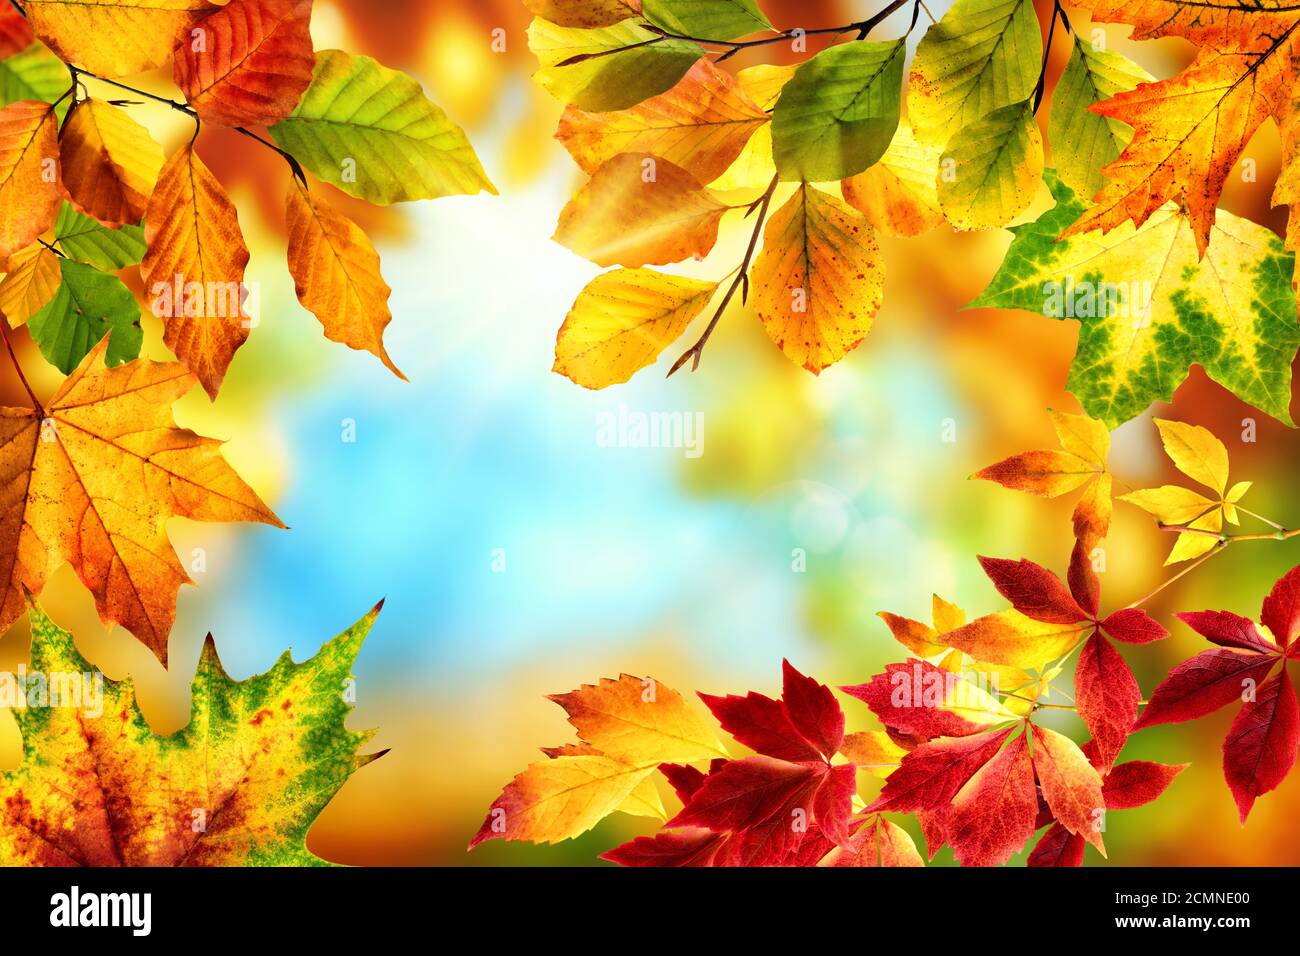 Nature frame with colorful autumn leaves in red, yellow and green around a nice abstract bokeh background with bright blue sky Stock Photo